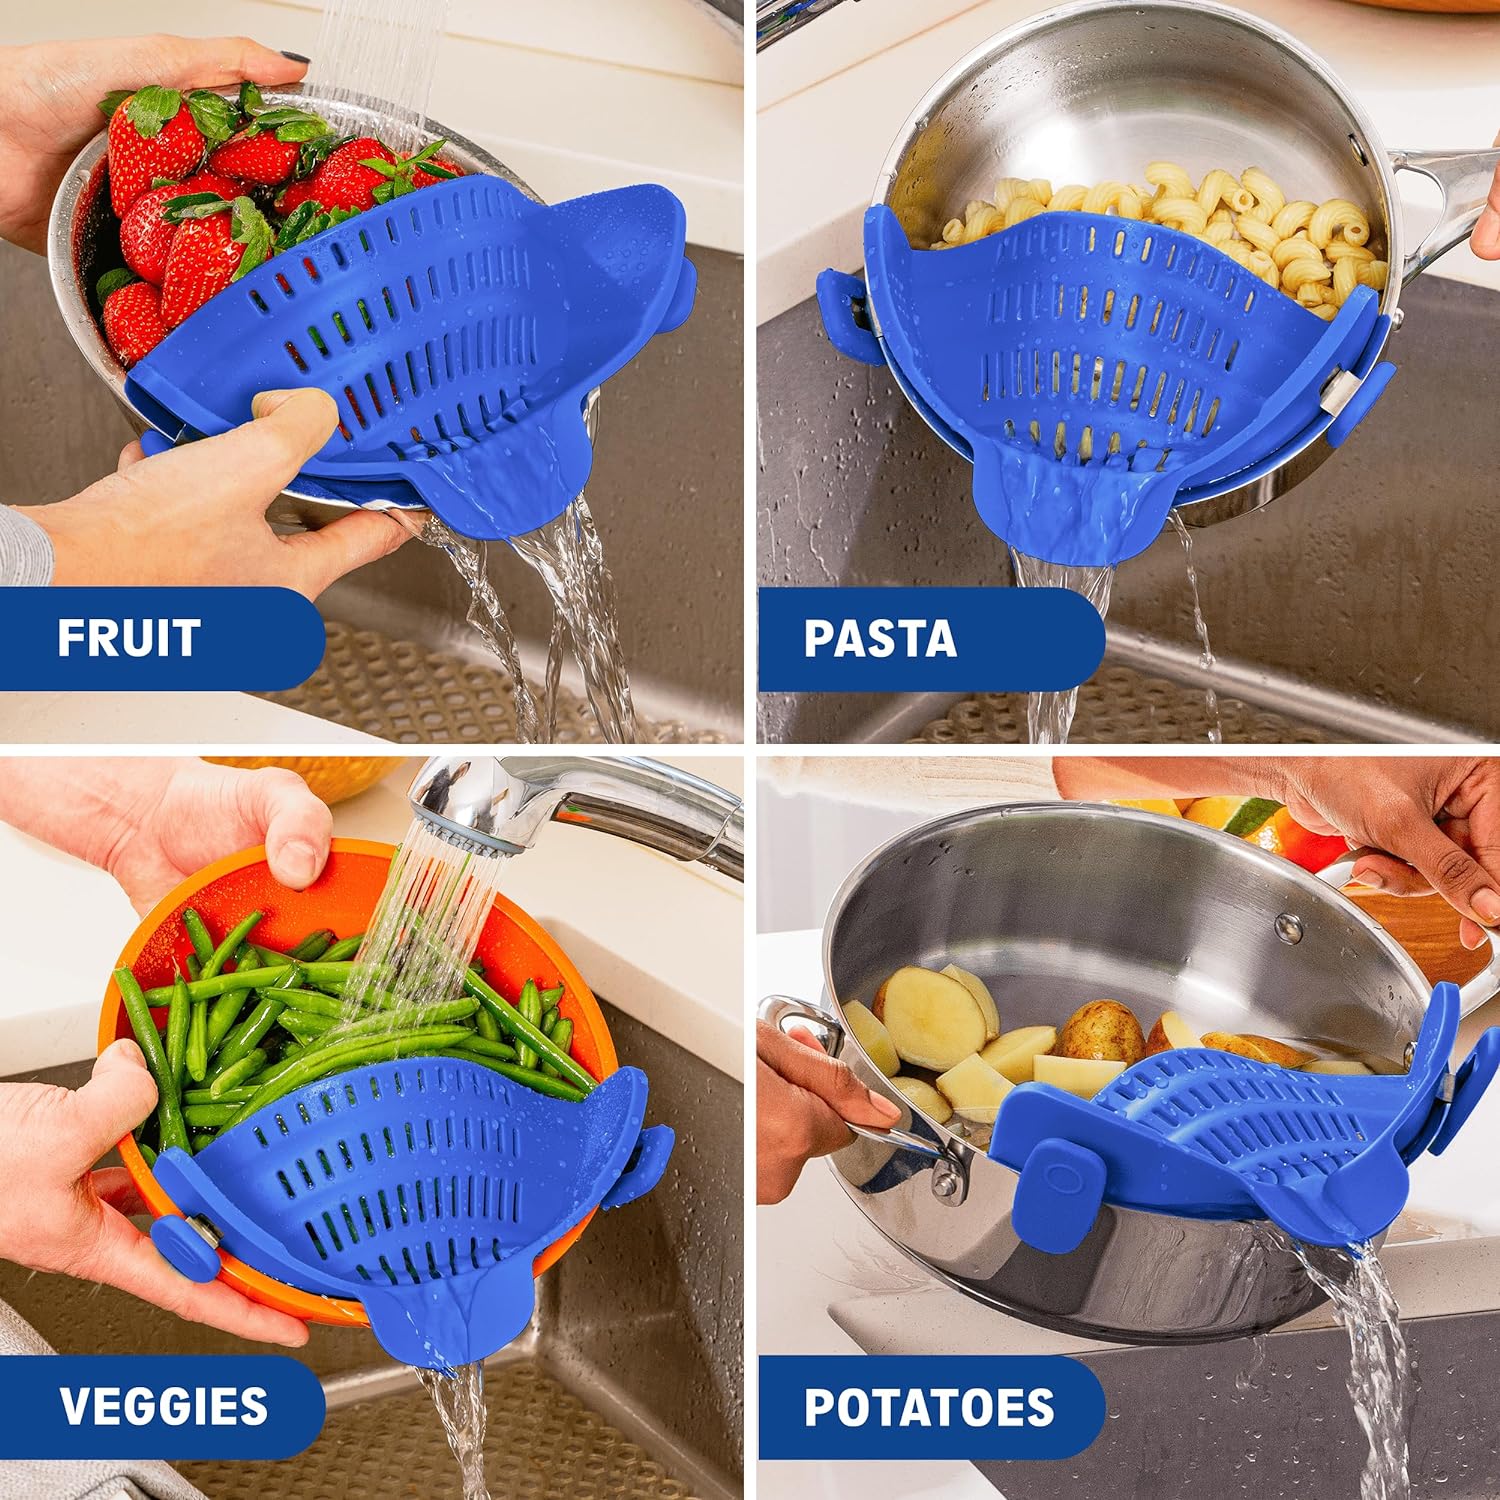 Snap N' Strain - Silicone Clip-On Colander, Heat Resistant Drainer for Vegetables and Pasta Noodles, Kitchen Gadgets for Bowl, Pots, and Pans - Essential Home Cooking Tools - Blue